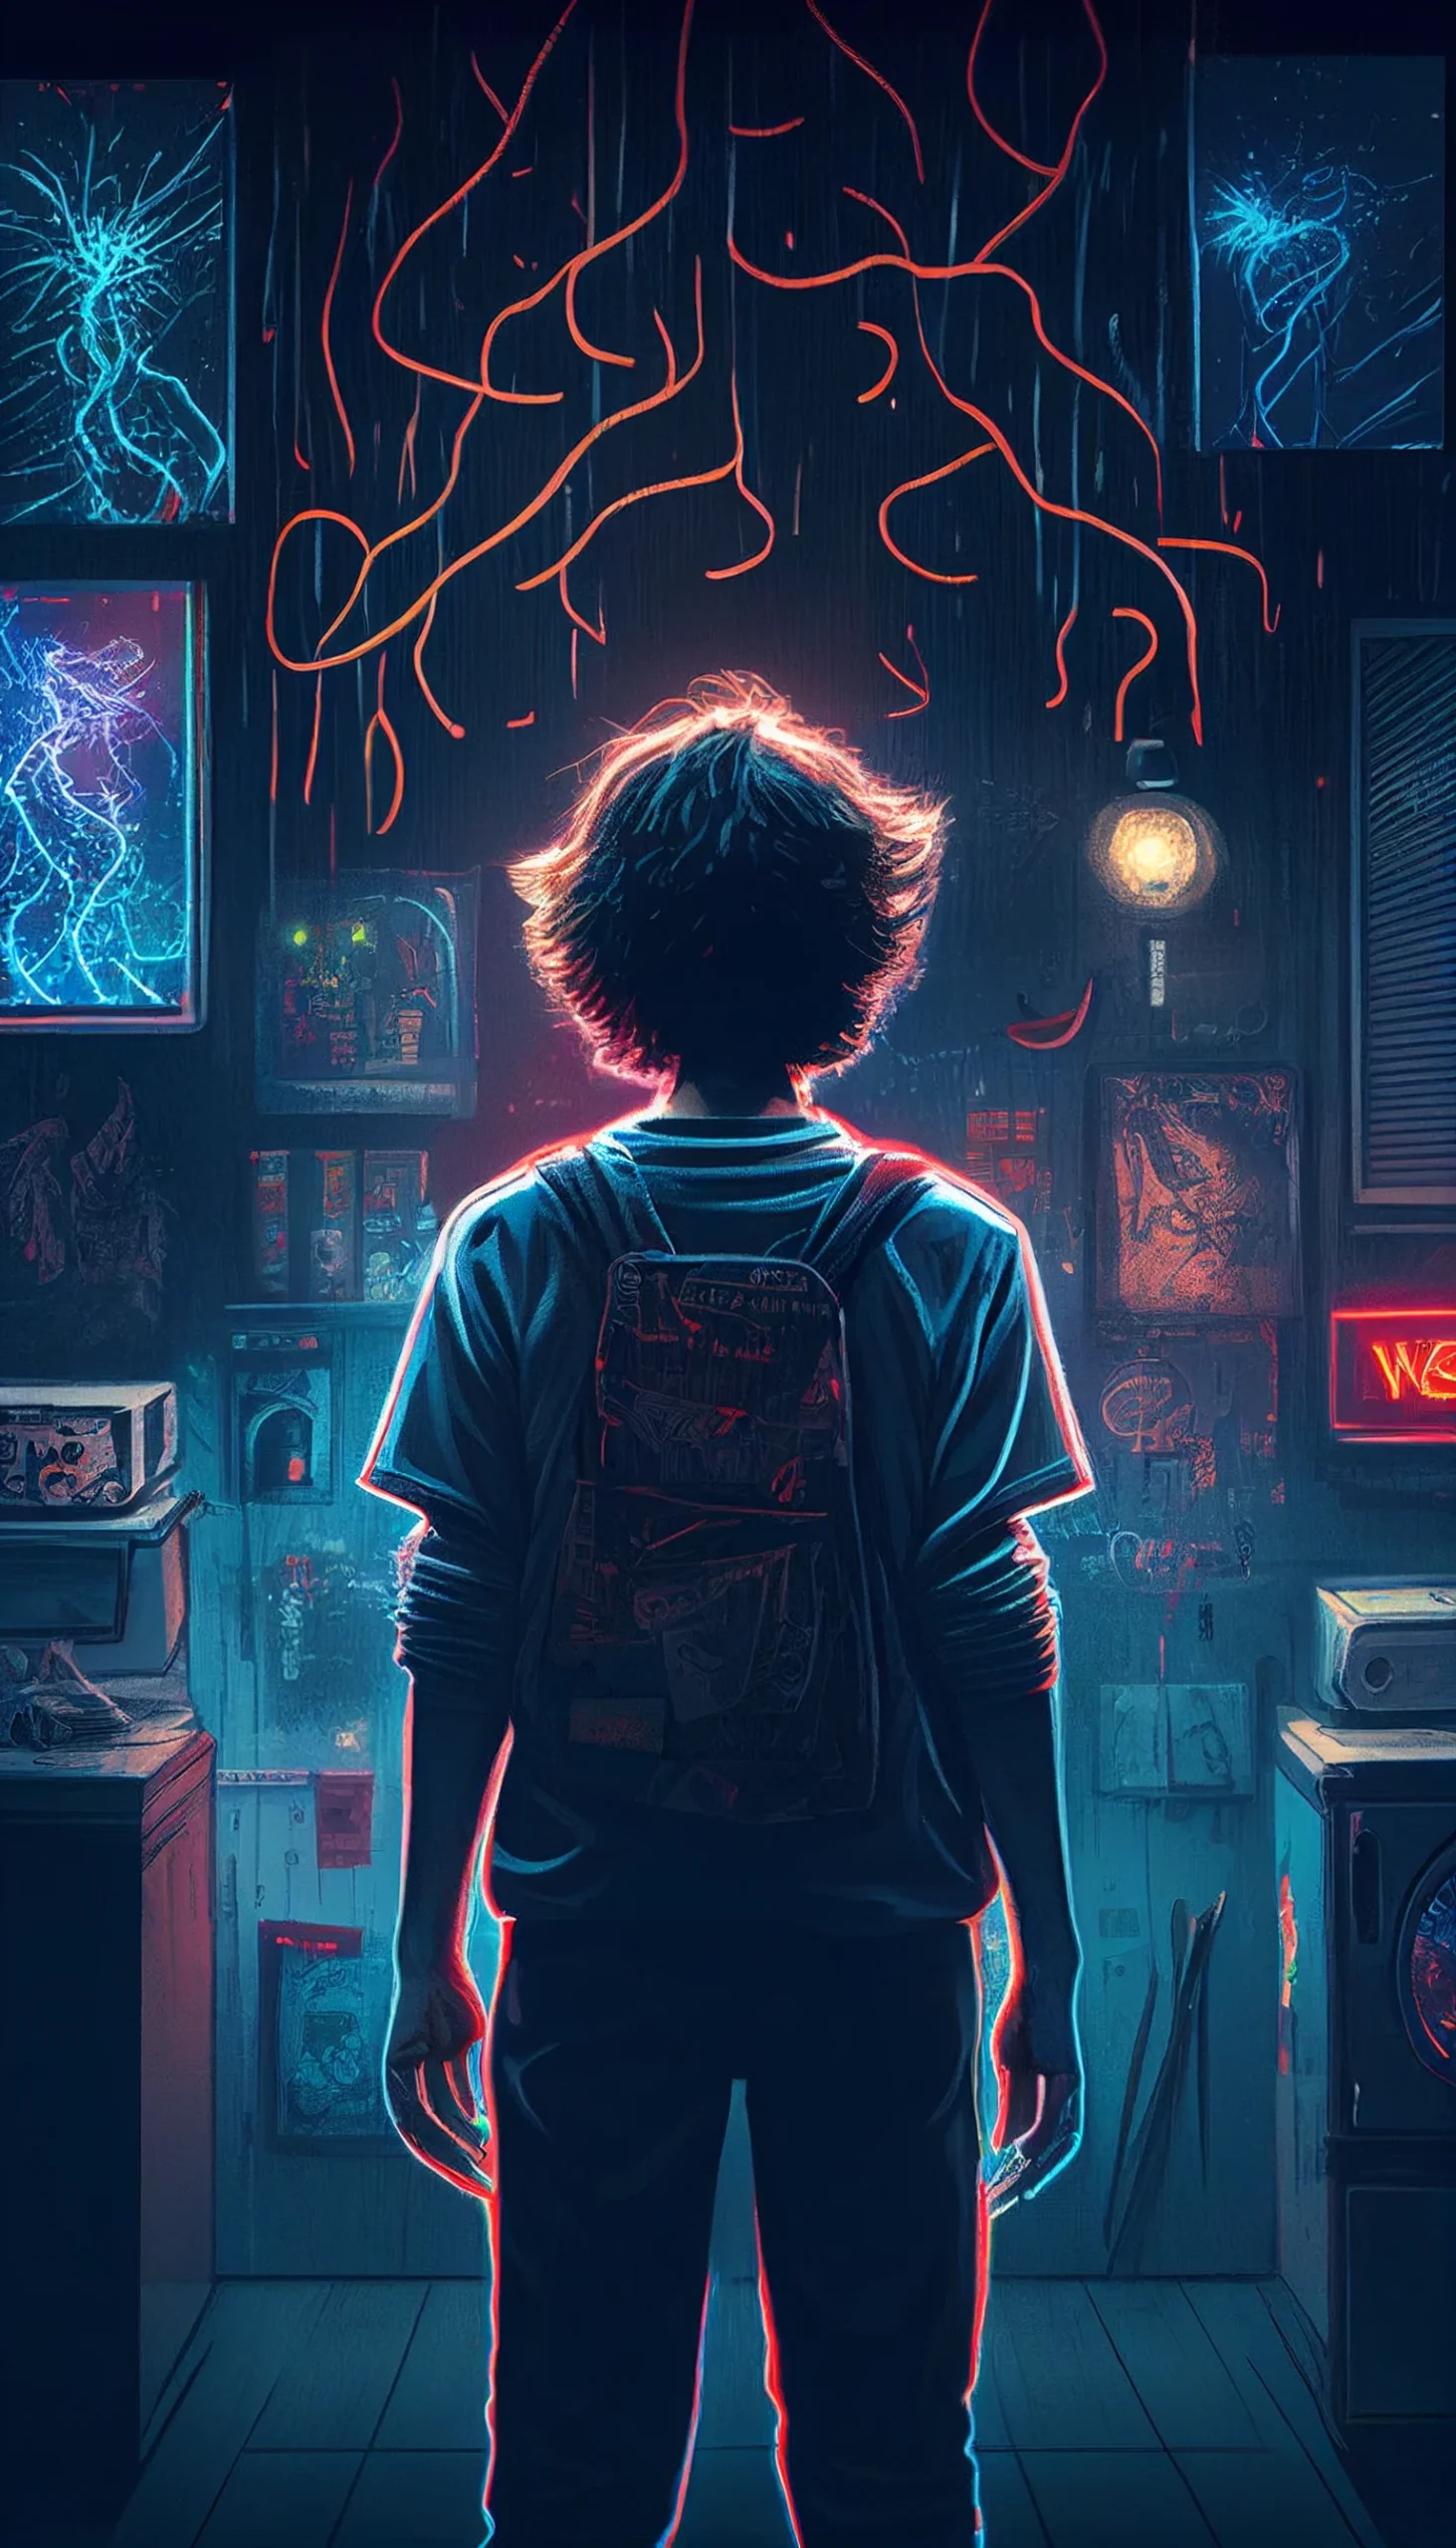 Stranger Things 3 iPhone Wallpaper with high-resolution 1125x2436 pixel. You can use this wallpaper for your iPhone 8, iPhone 8 Plus, iPhone X, XS, XS Max, XR - Stranger Things